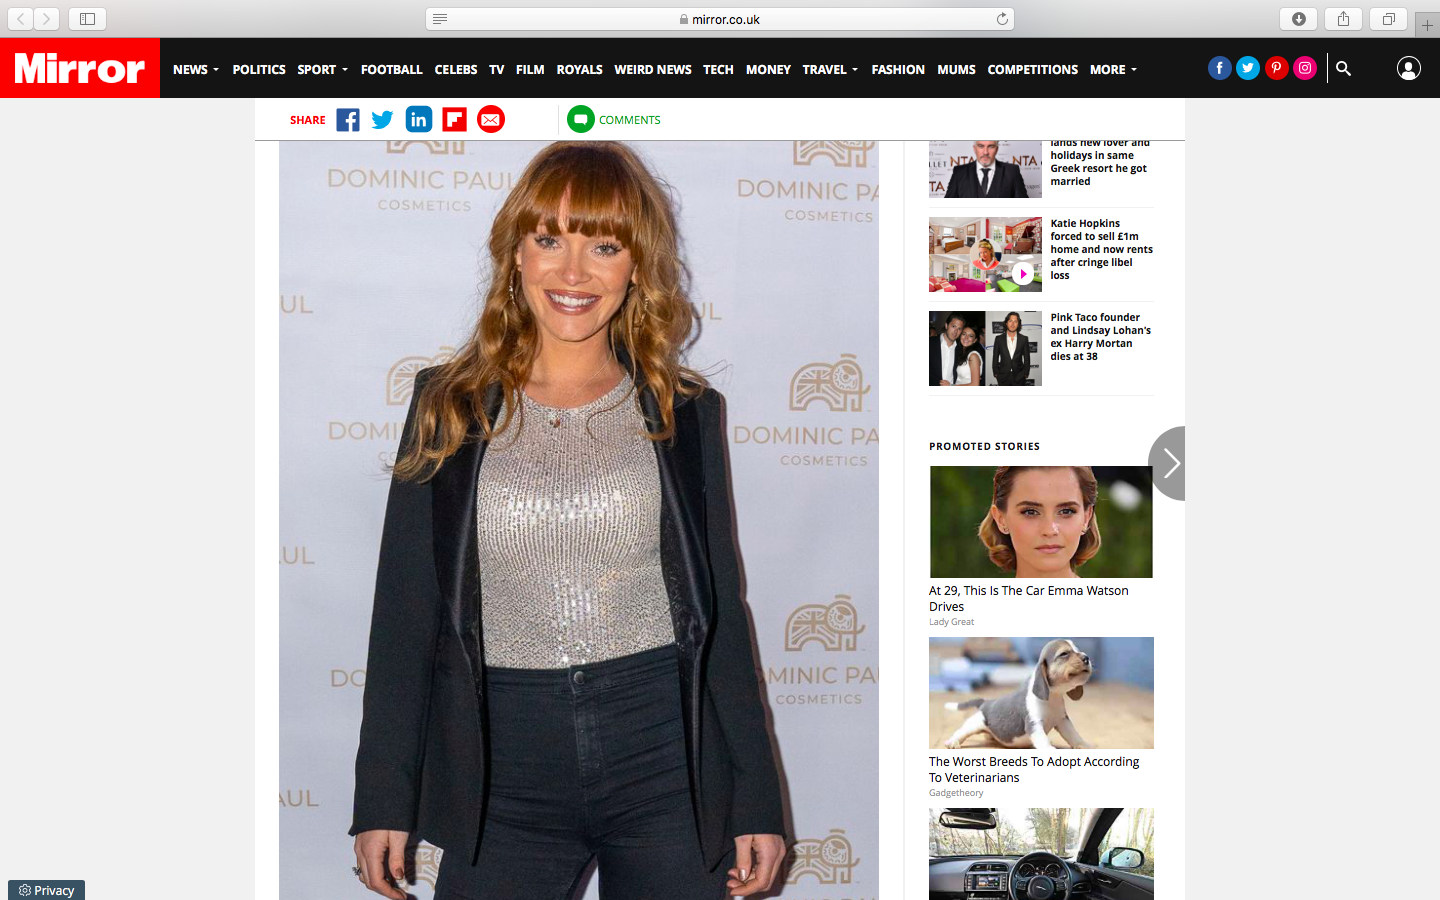 Summer Montey’s Fullam Looking gorgeous at our Dominic Paul Cosmetics Event | Mirror online